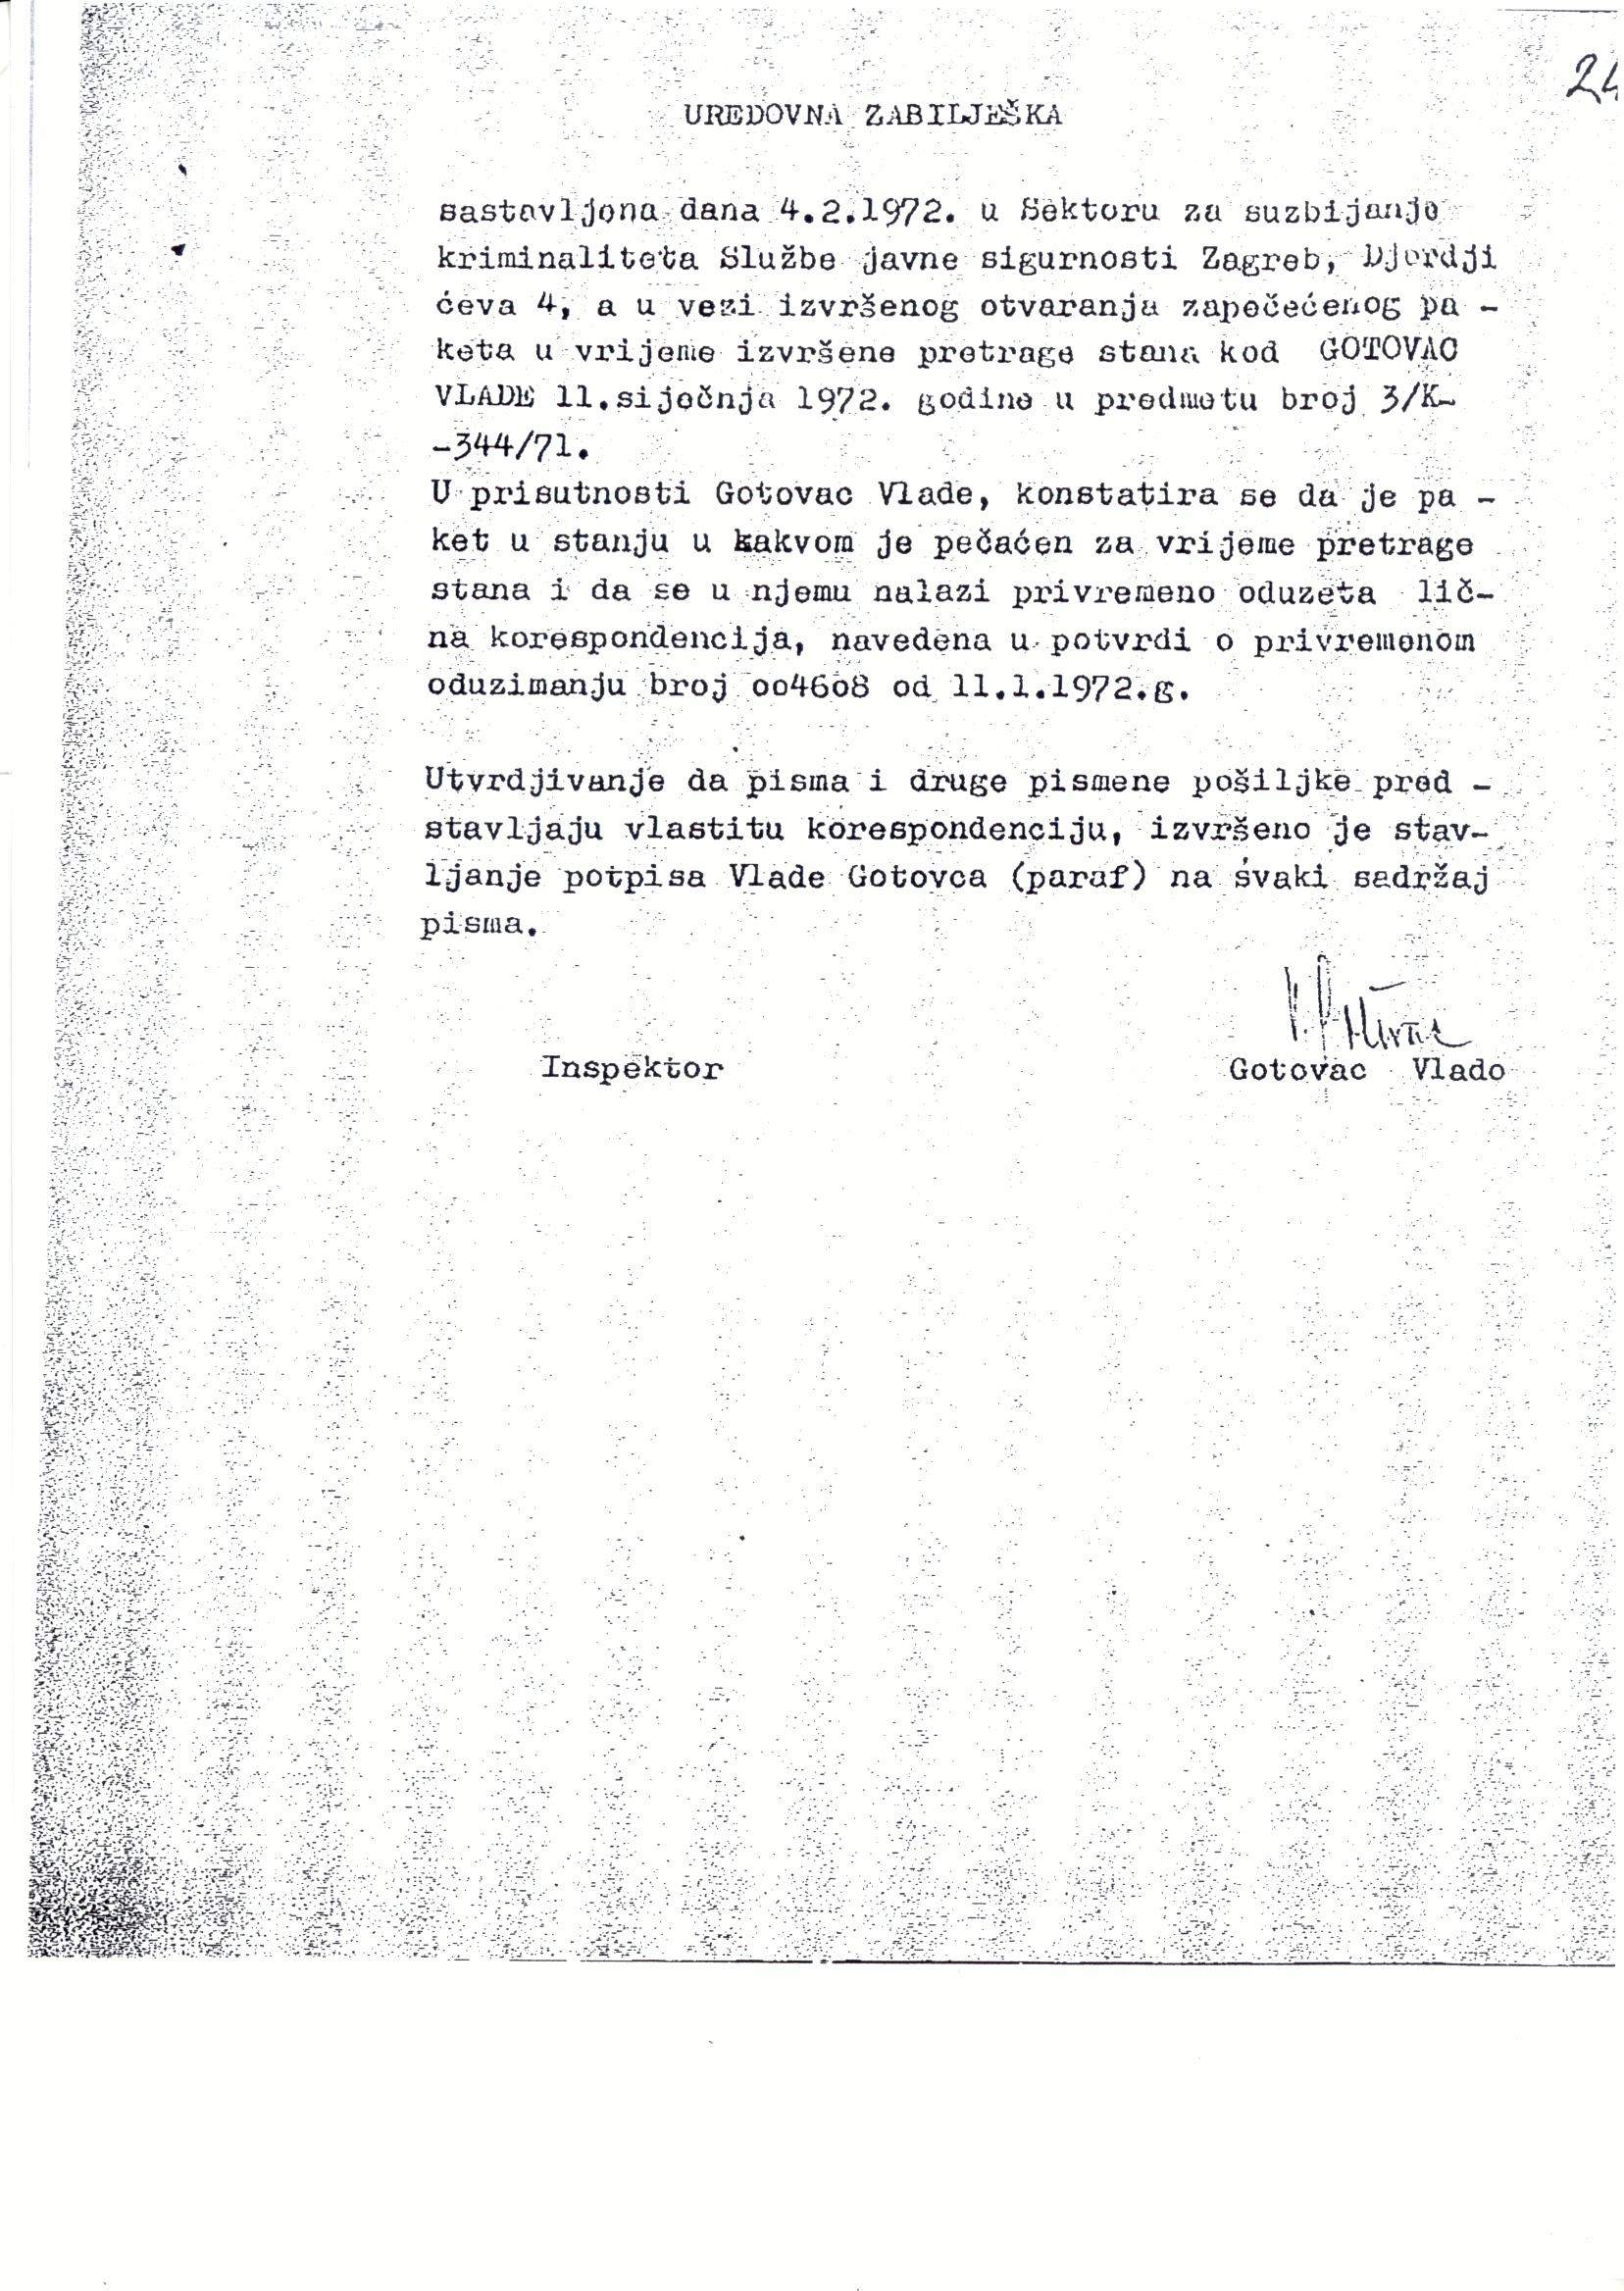 Official memorandum in Vlado Gotovac's personal file on personal correspondence seized during a search of his home. 4 February 1972. Archival document.